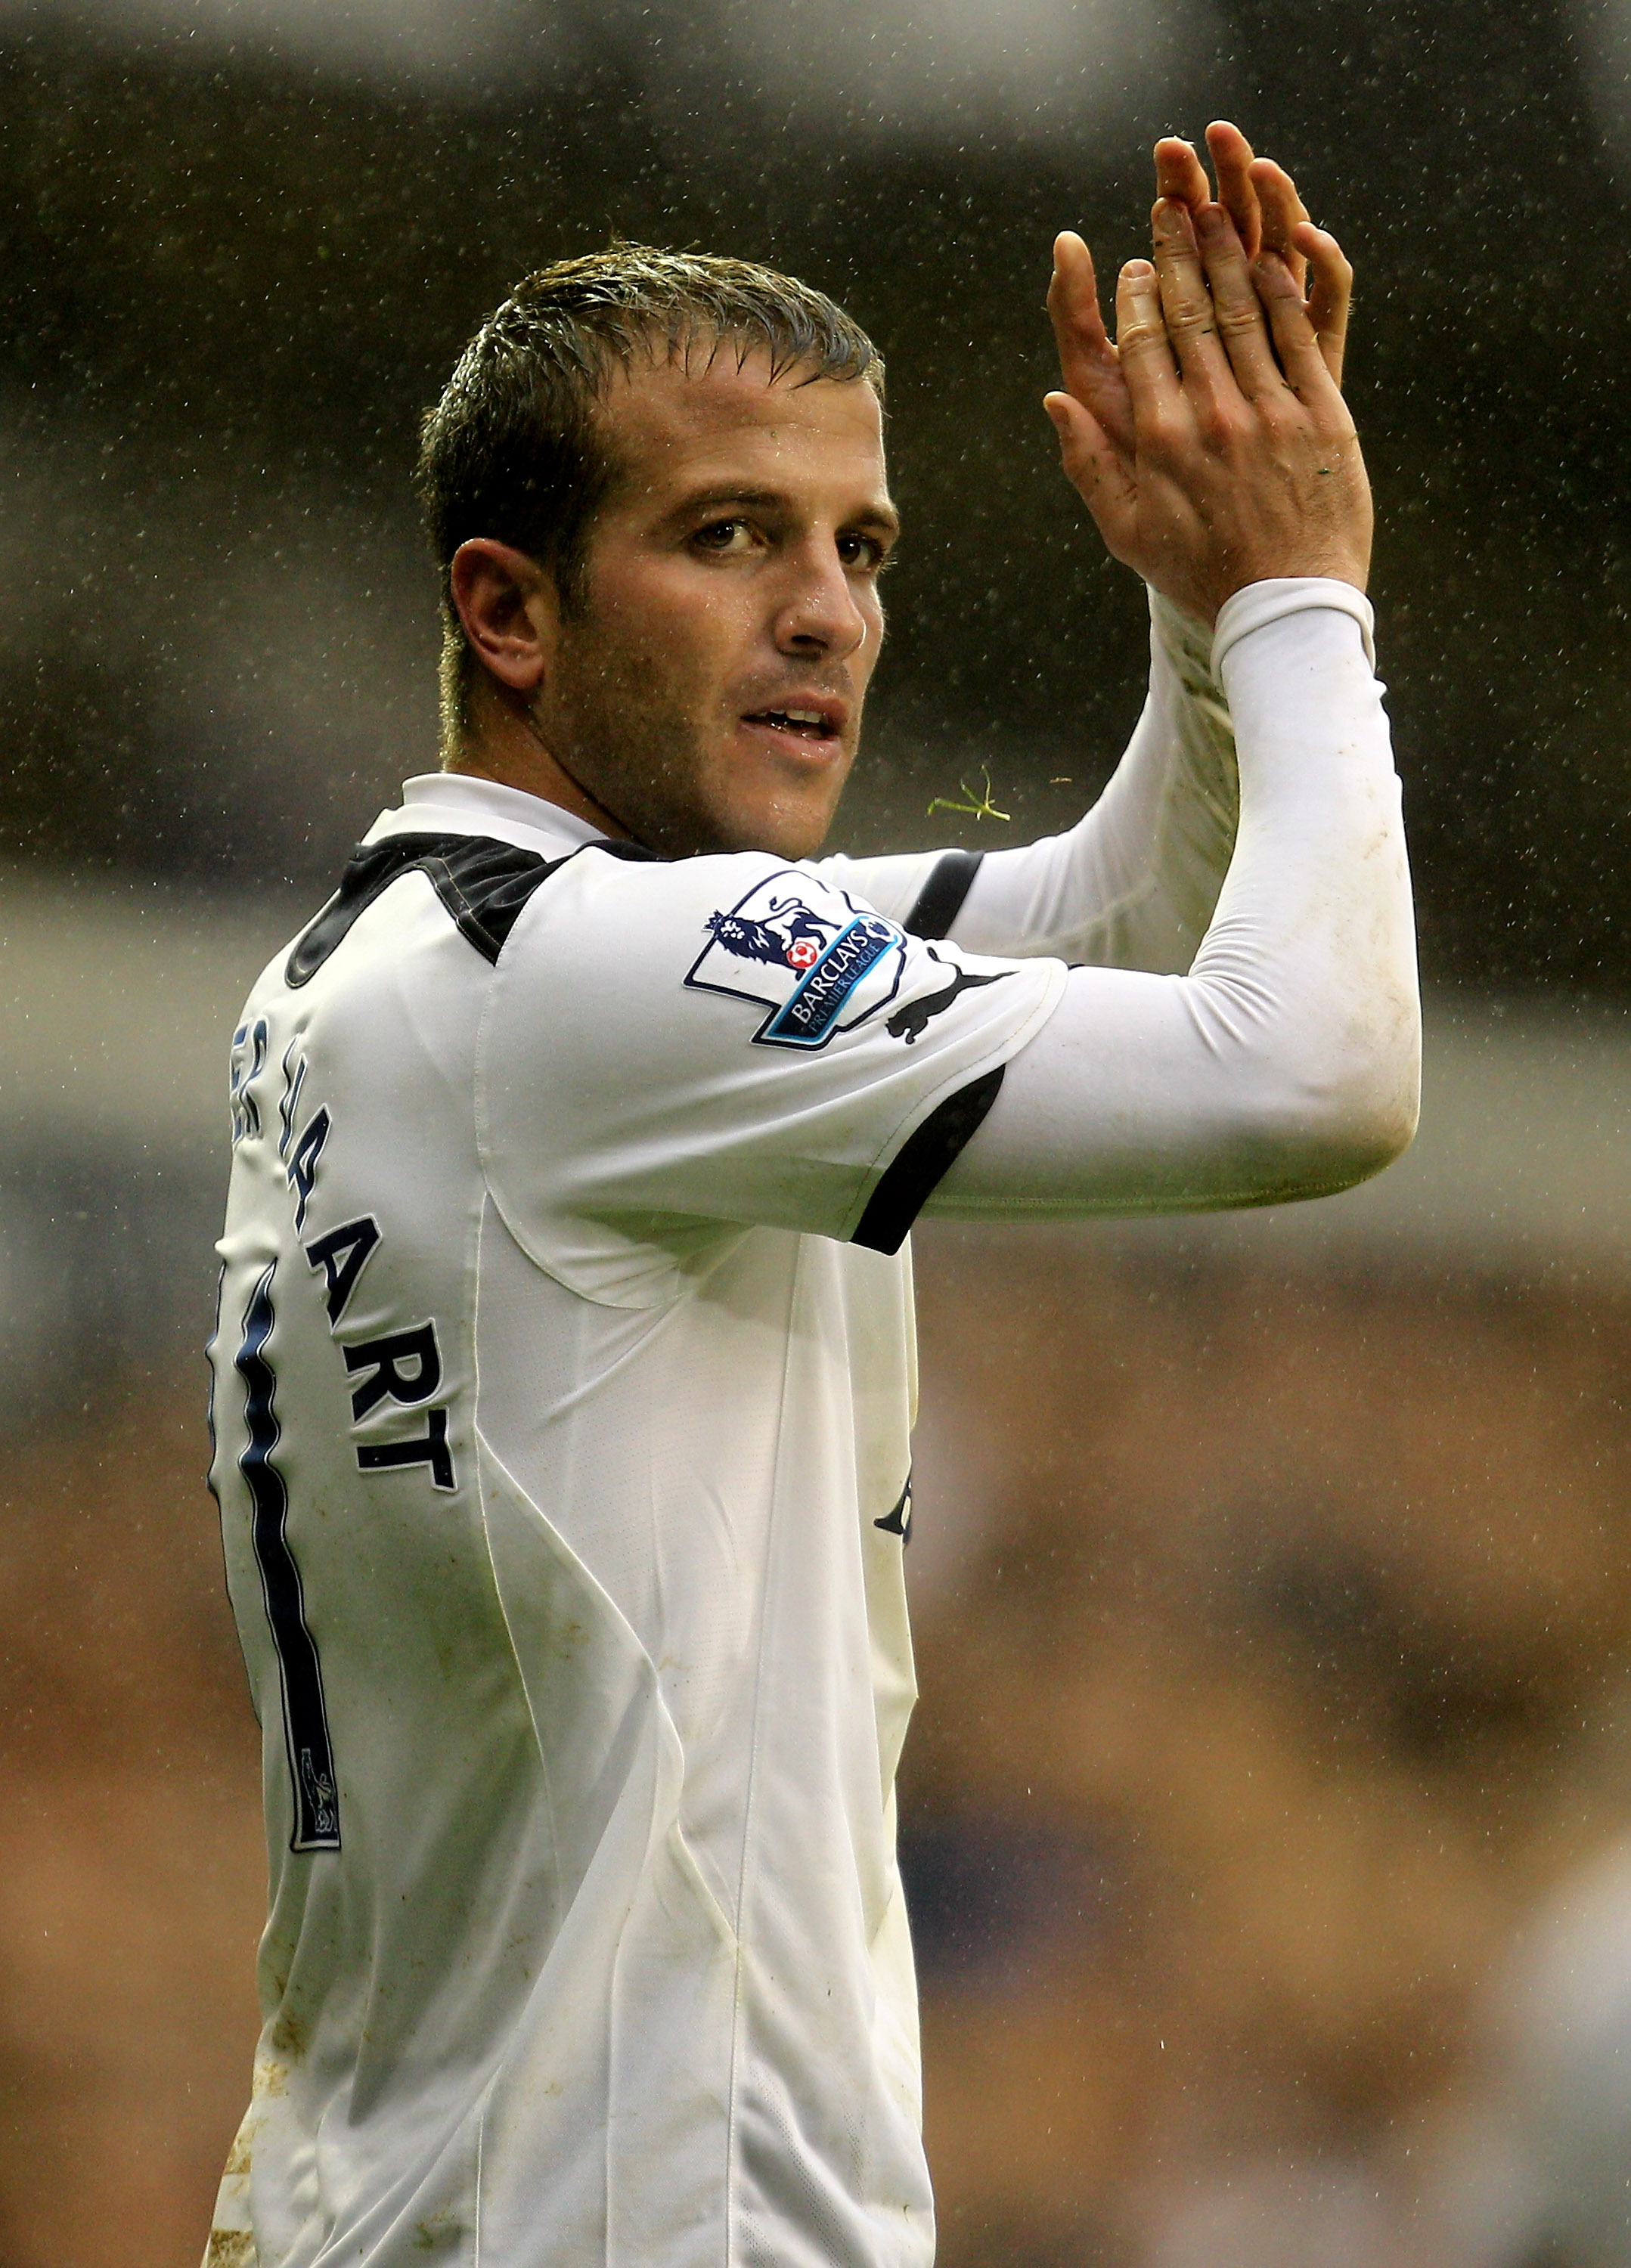 LONDON, ENGLAND - OCTOBER 02:  Rafael Van der Vaart of Spurs celebrates scoring their second goal during the Barclays Premier League match between Tottenham Hotspur and Aston Villa at White Hart Lane on October 2, 2010 in London, England.  (Photo by Paul 